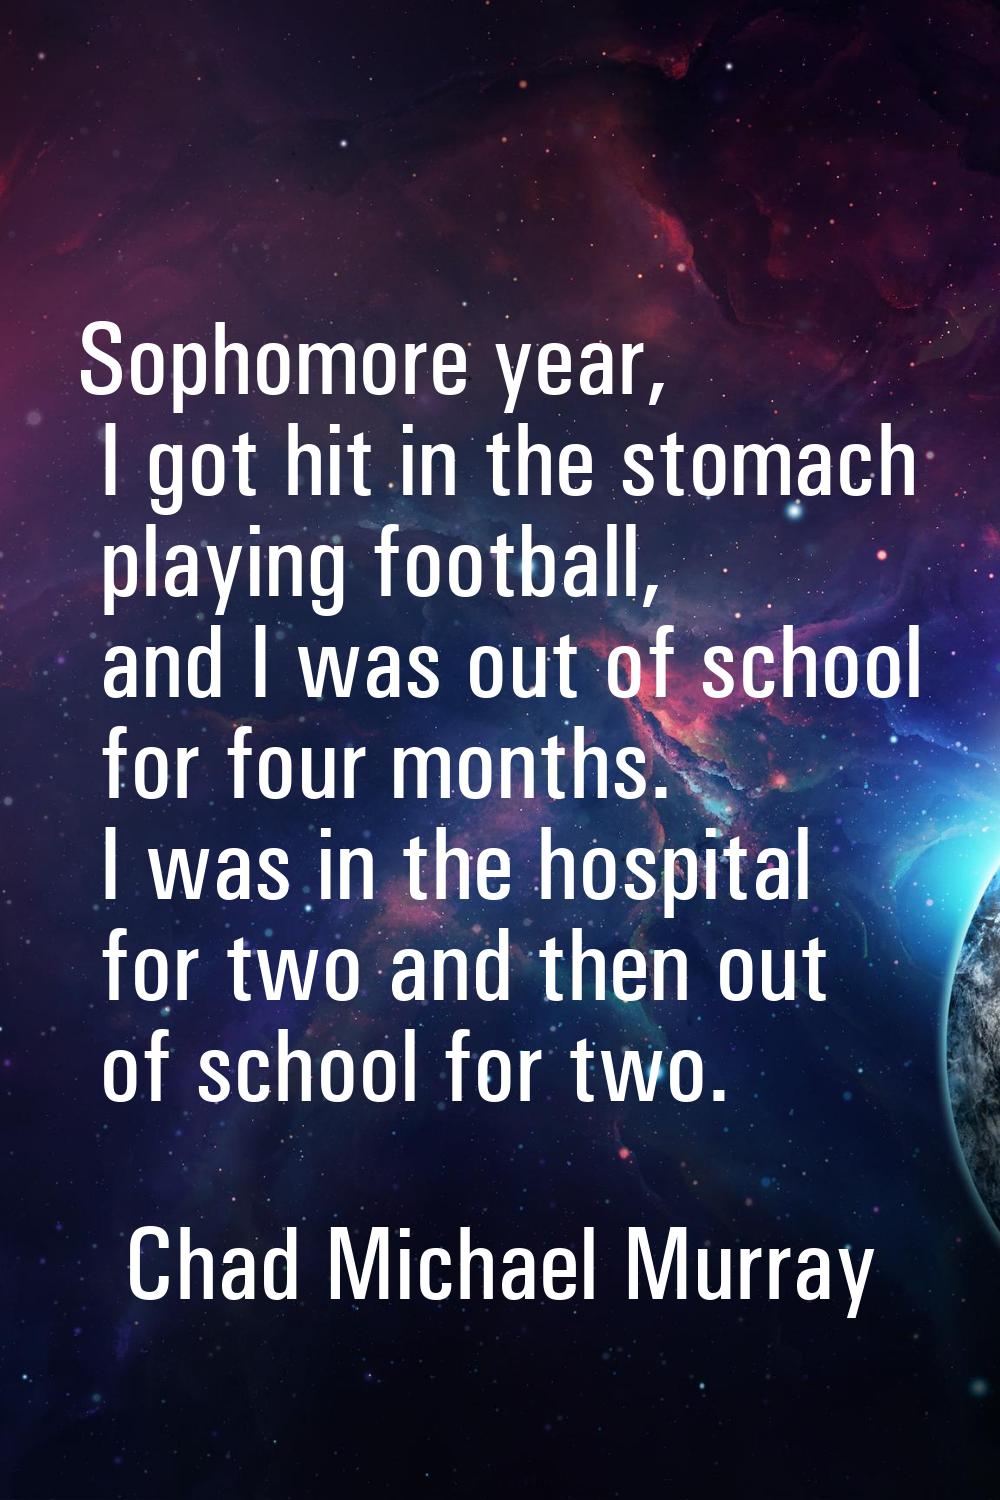 Sophomore year, I got hit in the stomach playing football, and I was out of school for four months.